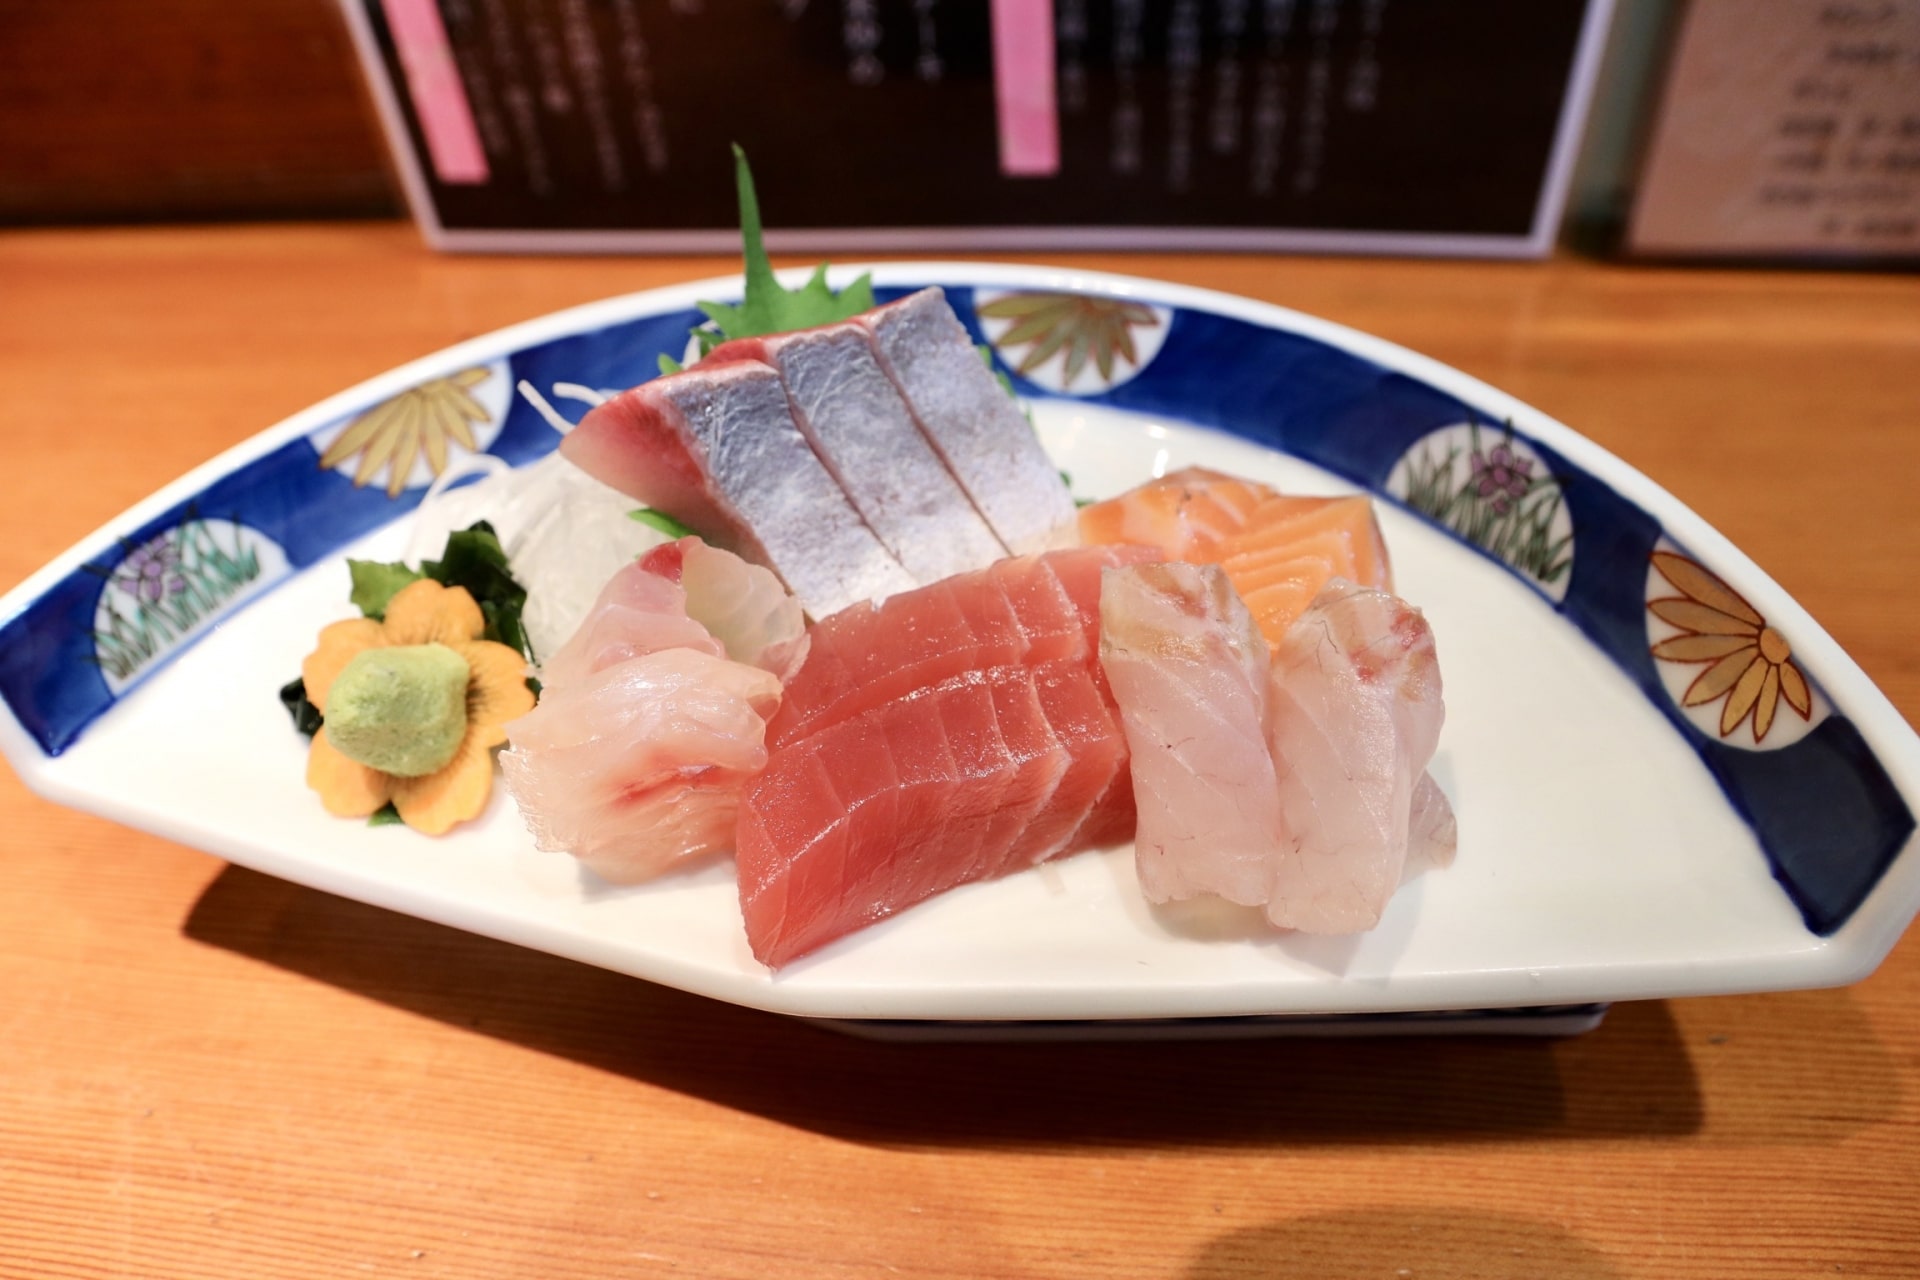 Sashimi is slices of raw fish without rice